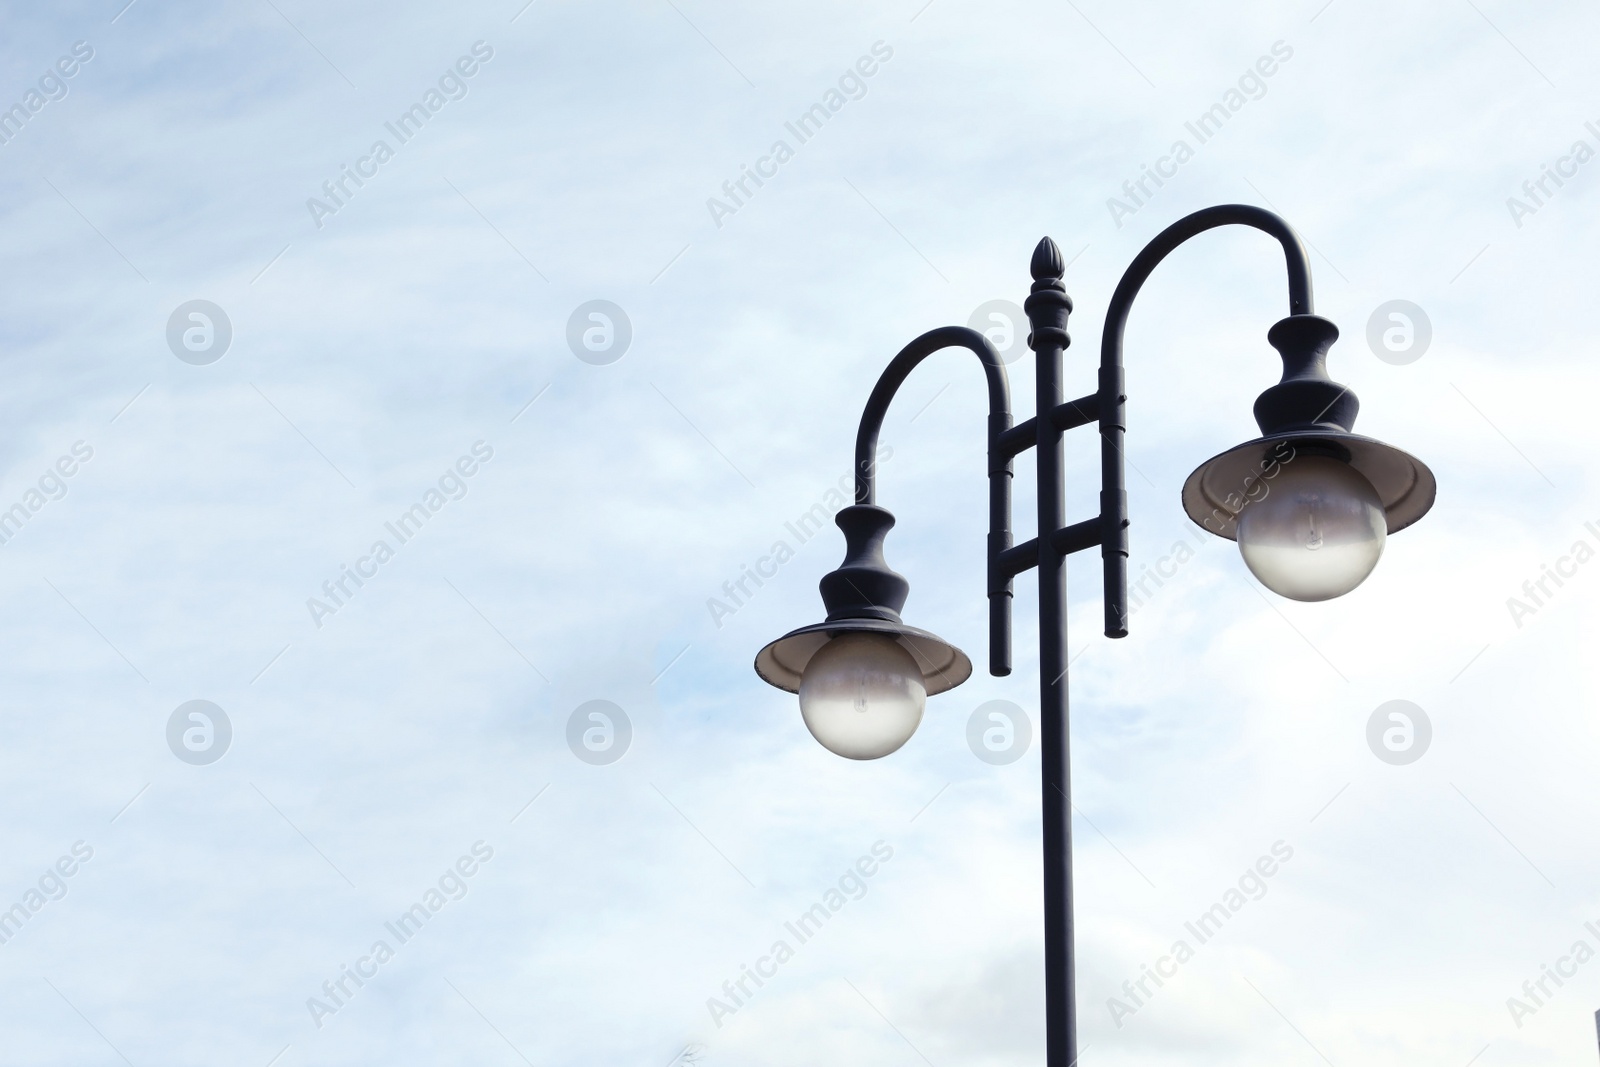 Photo of Old fashioned street light lamp against cloudy sky